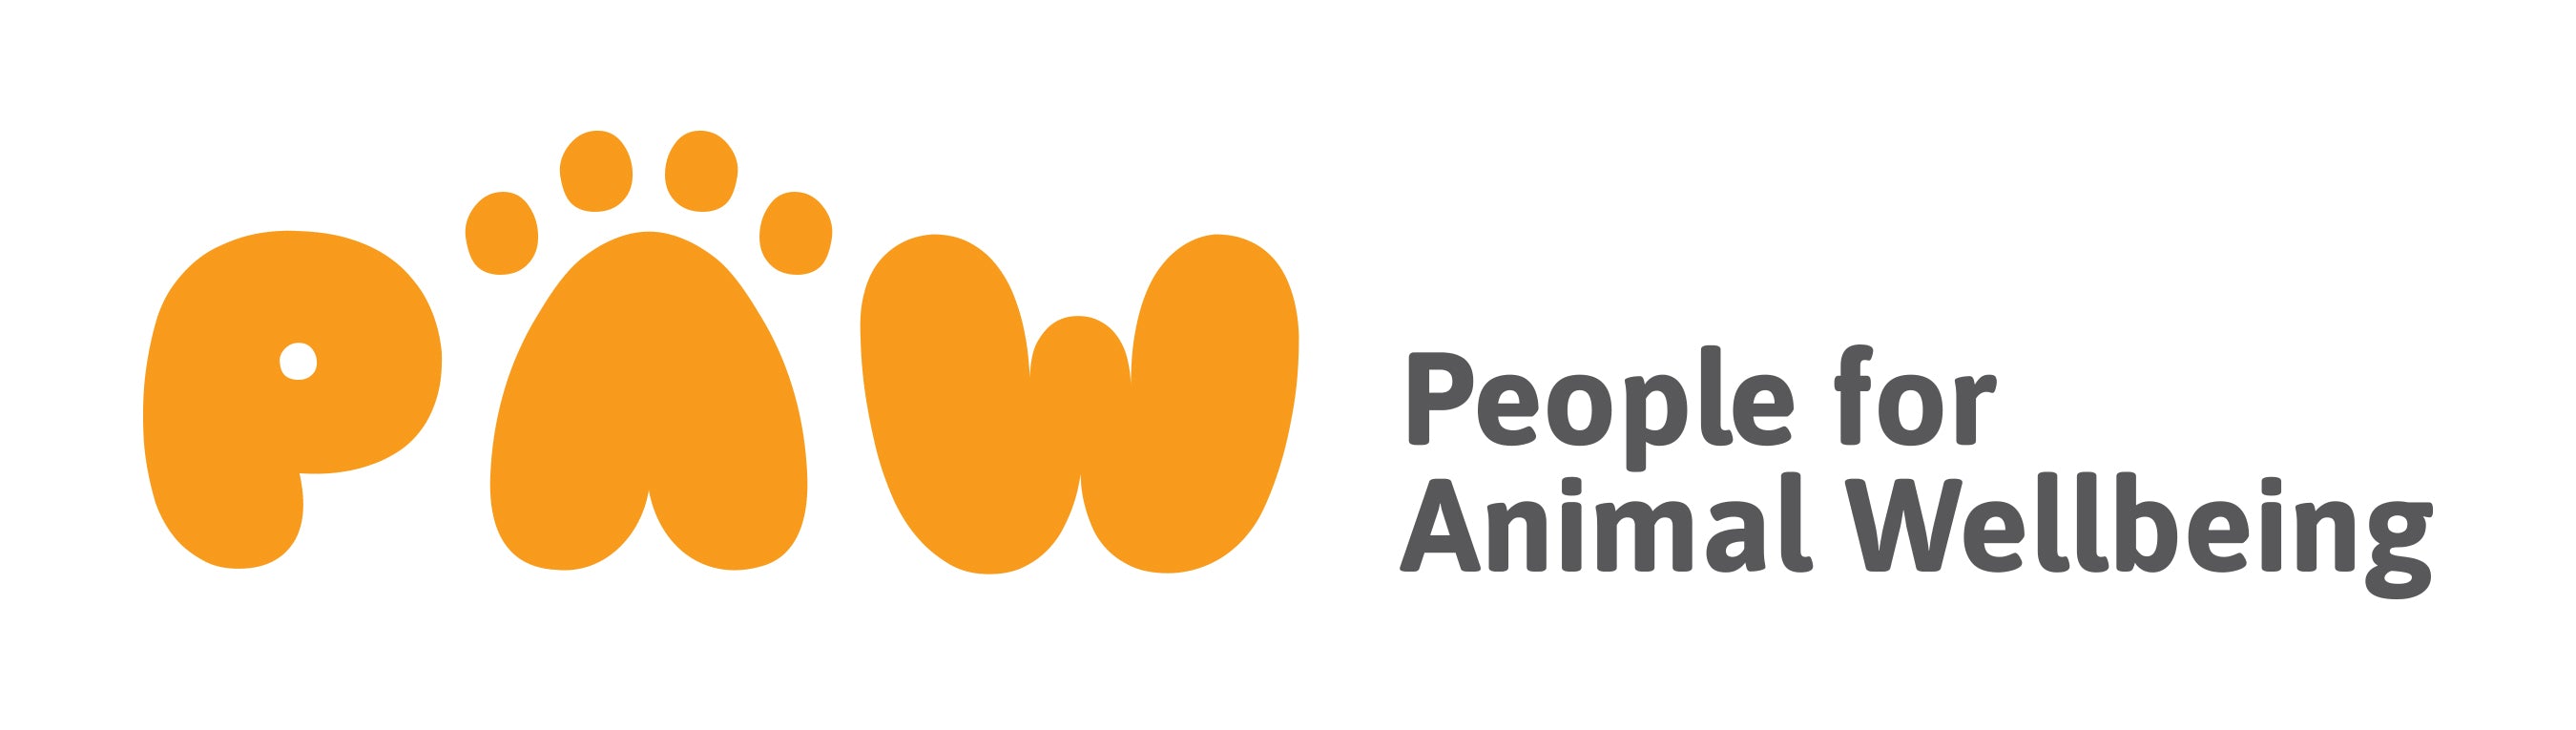 People for Animal Wellbeing